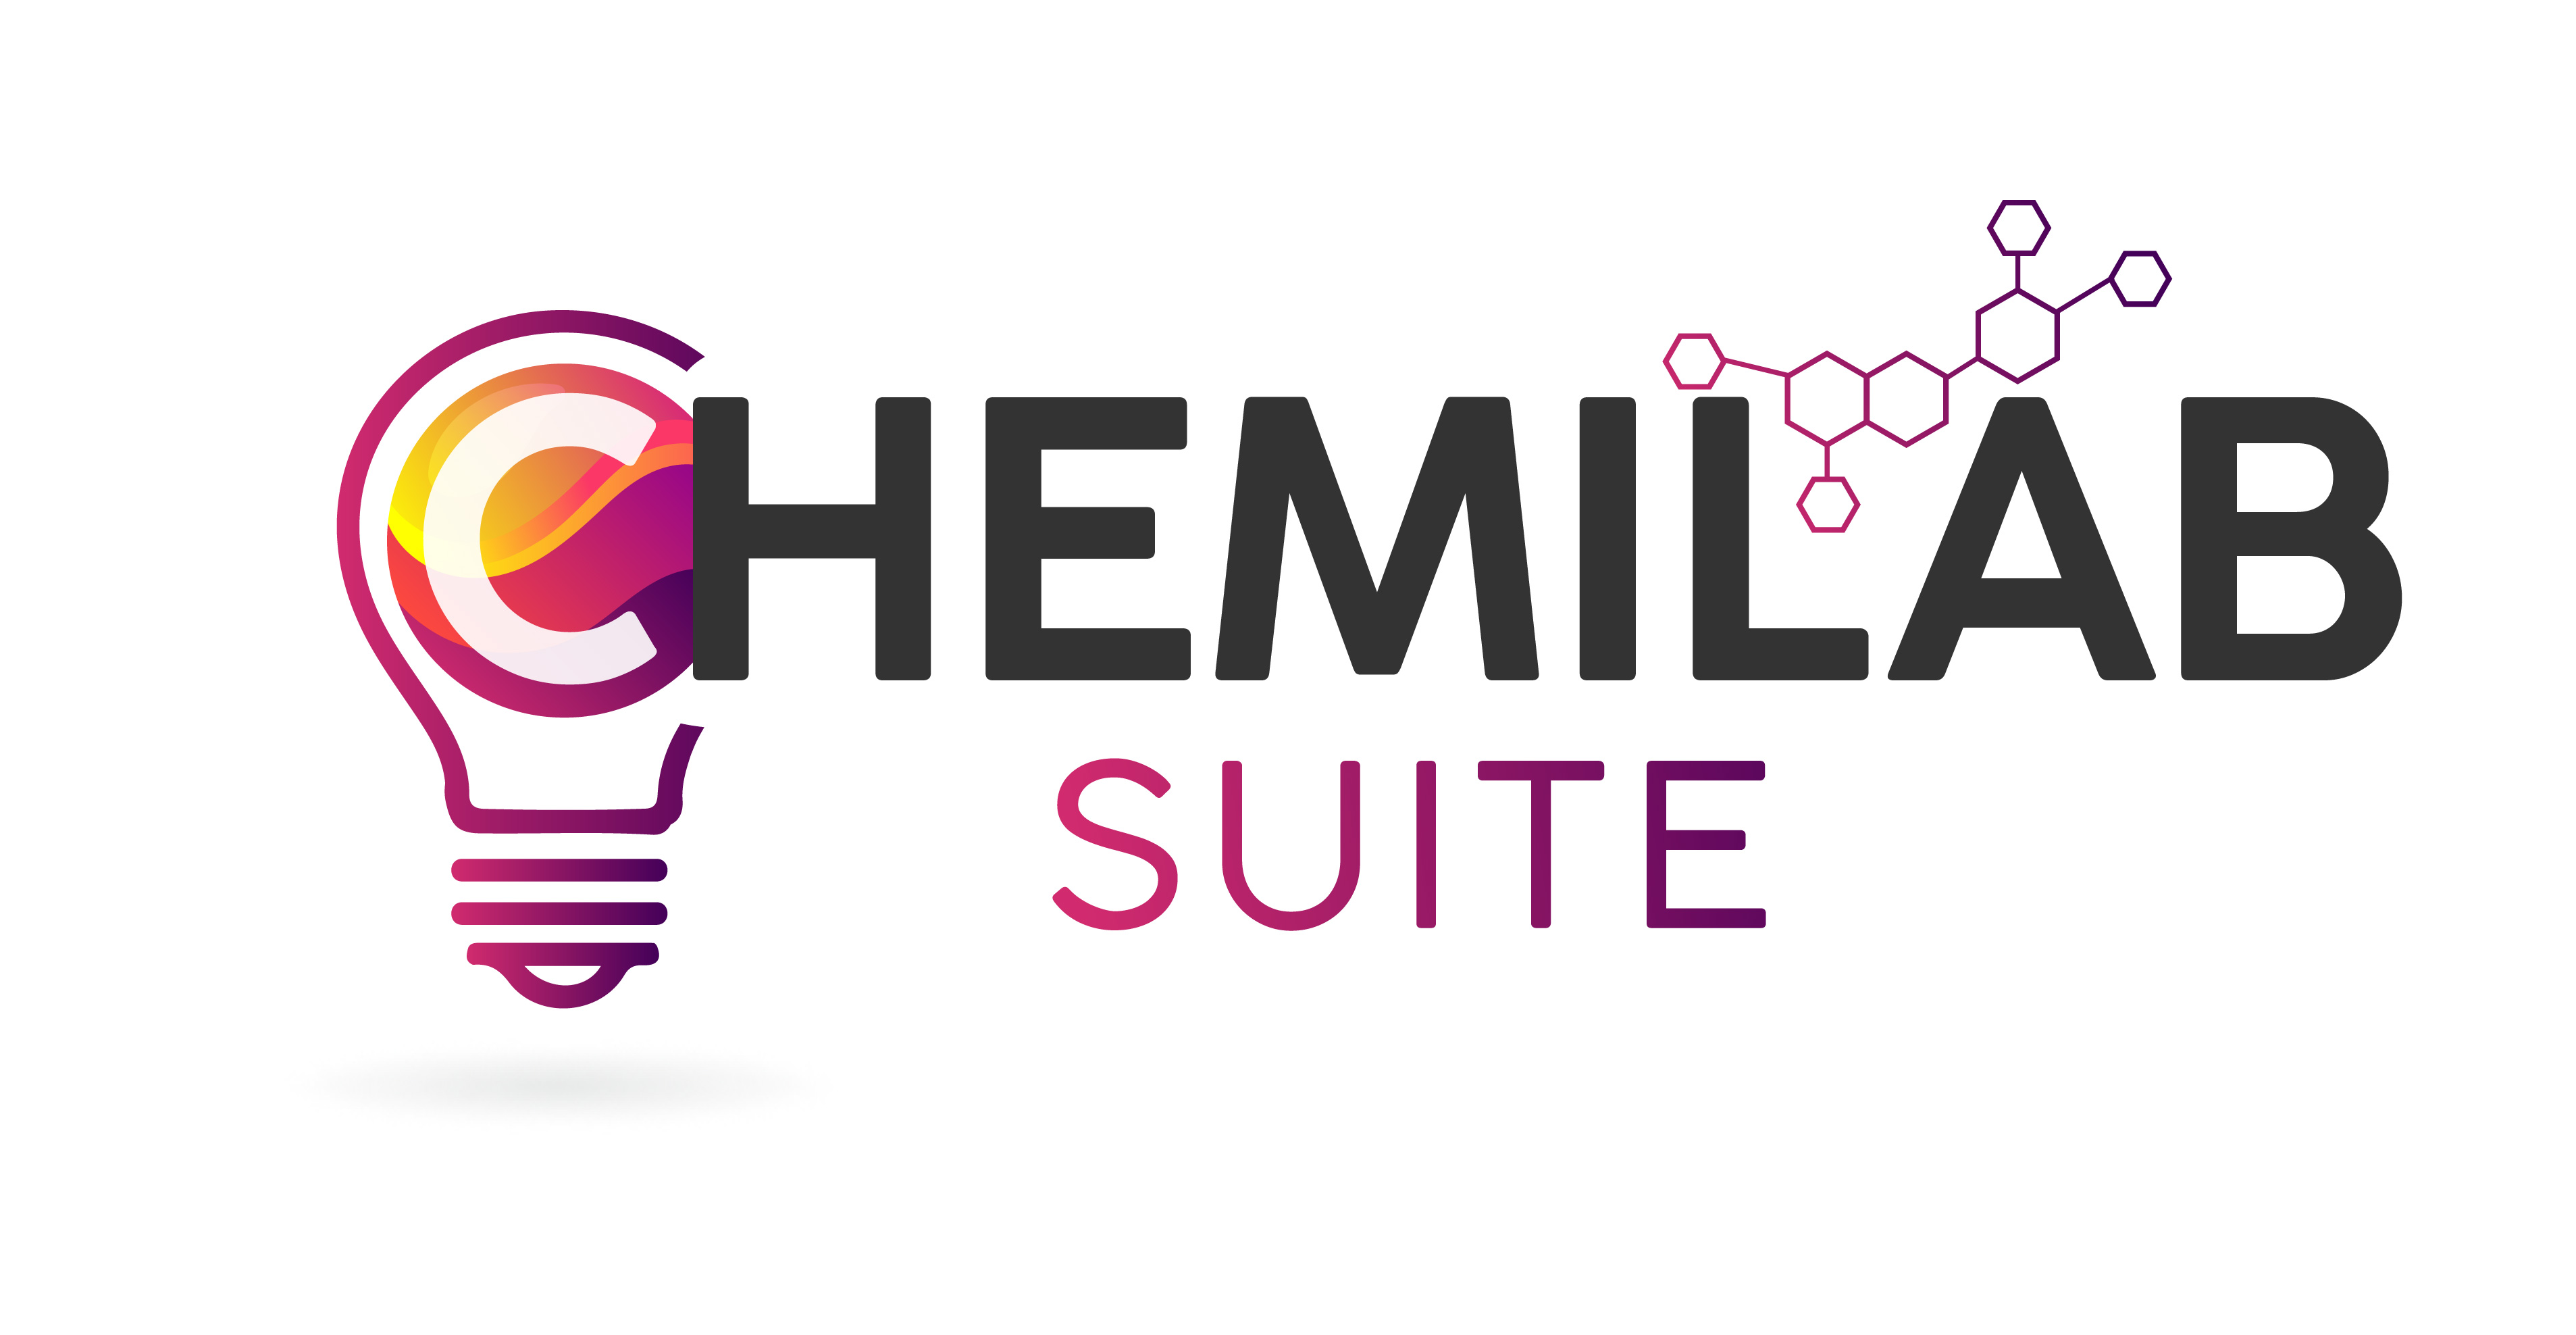 CHEMILAB SUITE cosmetic software